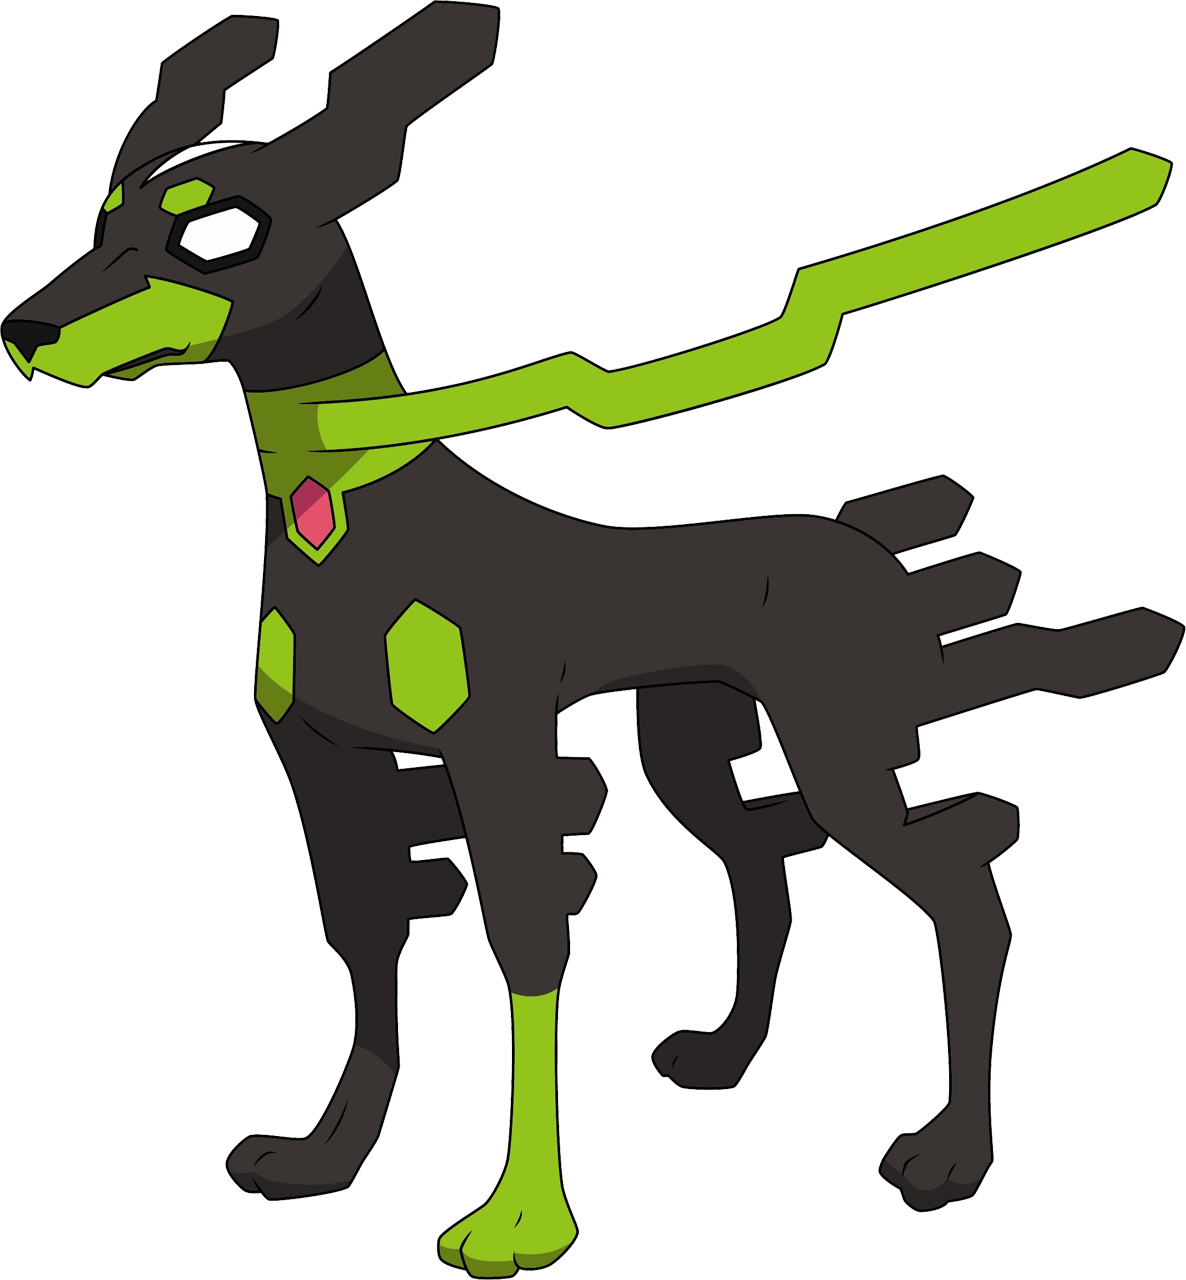 Zygarde 10% Forme Is A Zygarde With 10% Of Its Cells - Zygarde 10% Form (1186x1280)